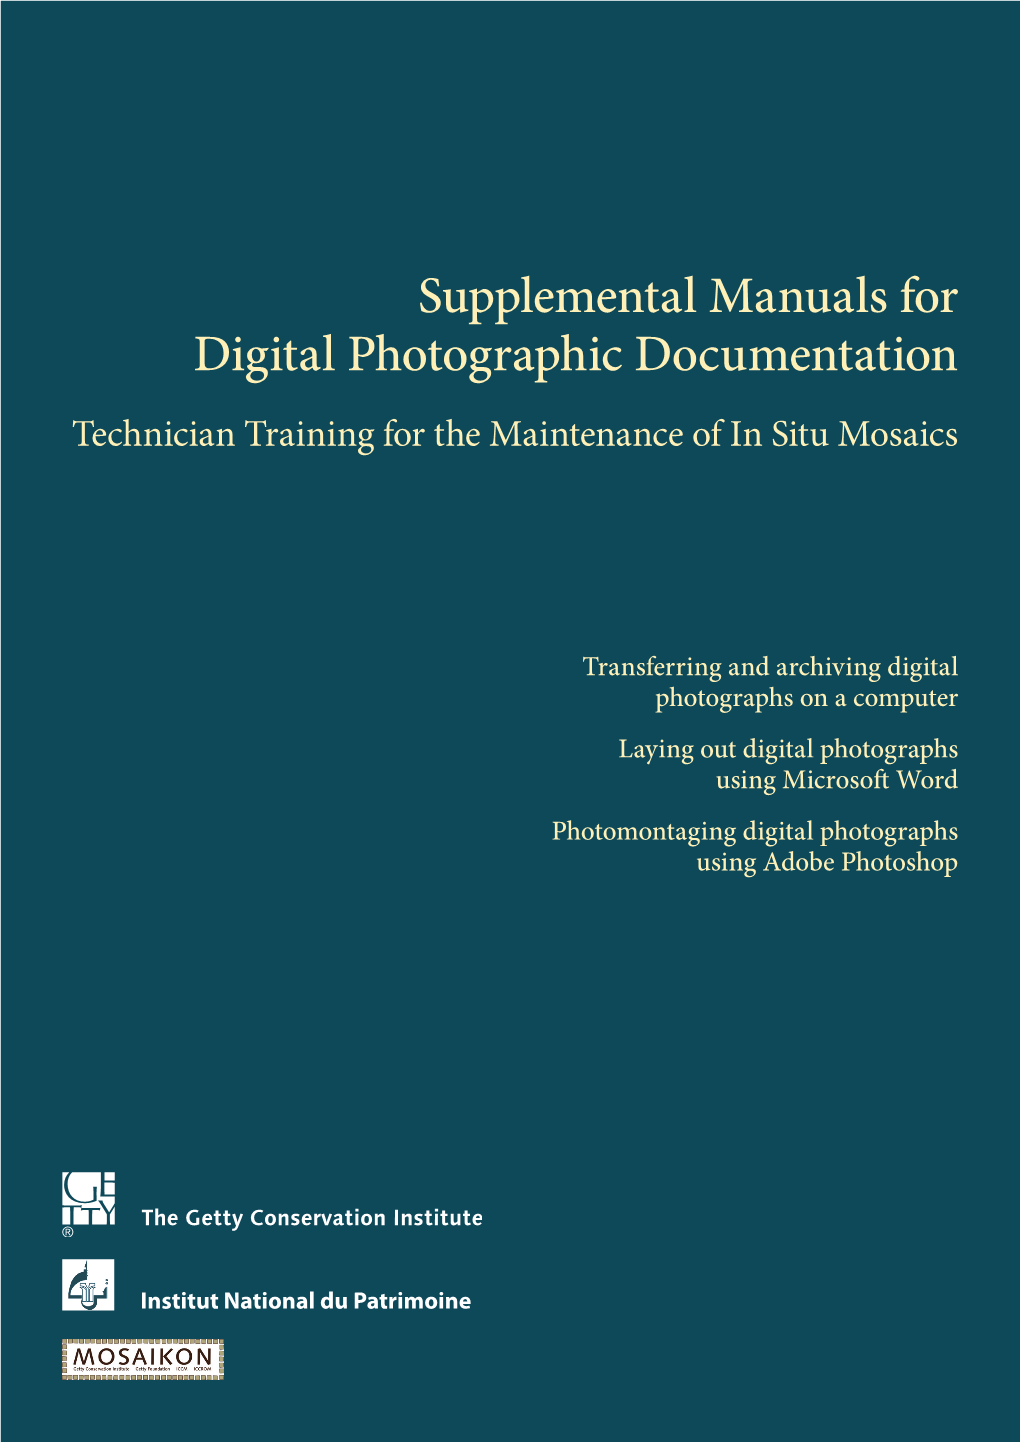 Supplemental Manuals for Digital Photographic Documentation Technician Training for the Maintenance of in Situ Mosaics